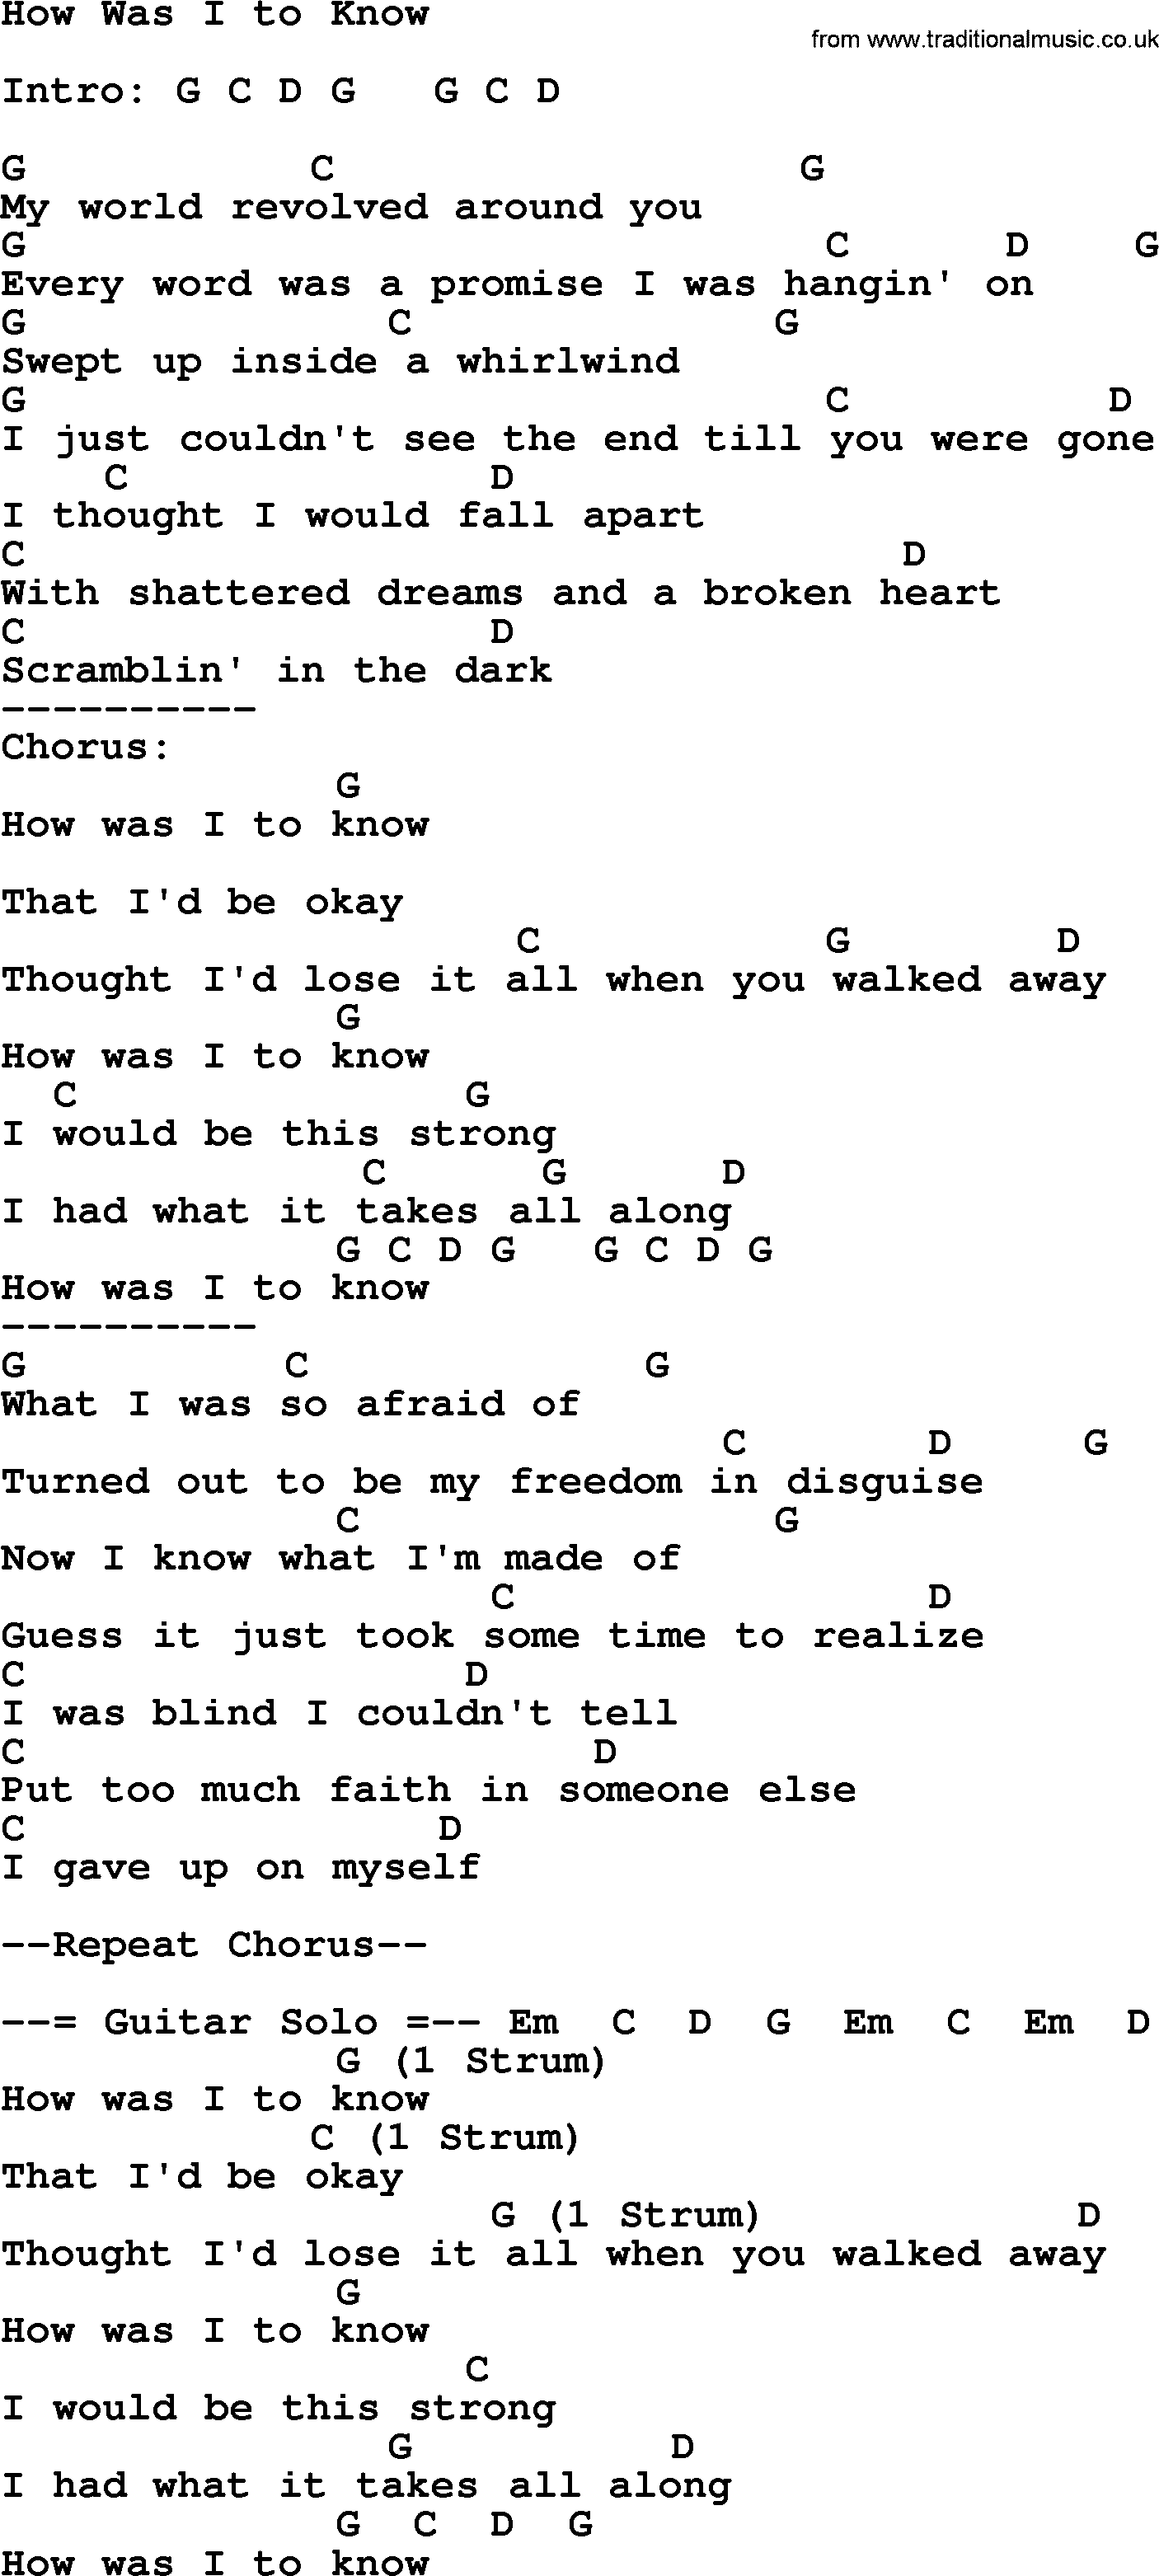 Reba McEntire song: How Was I to Know, lyrics and chords